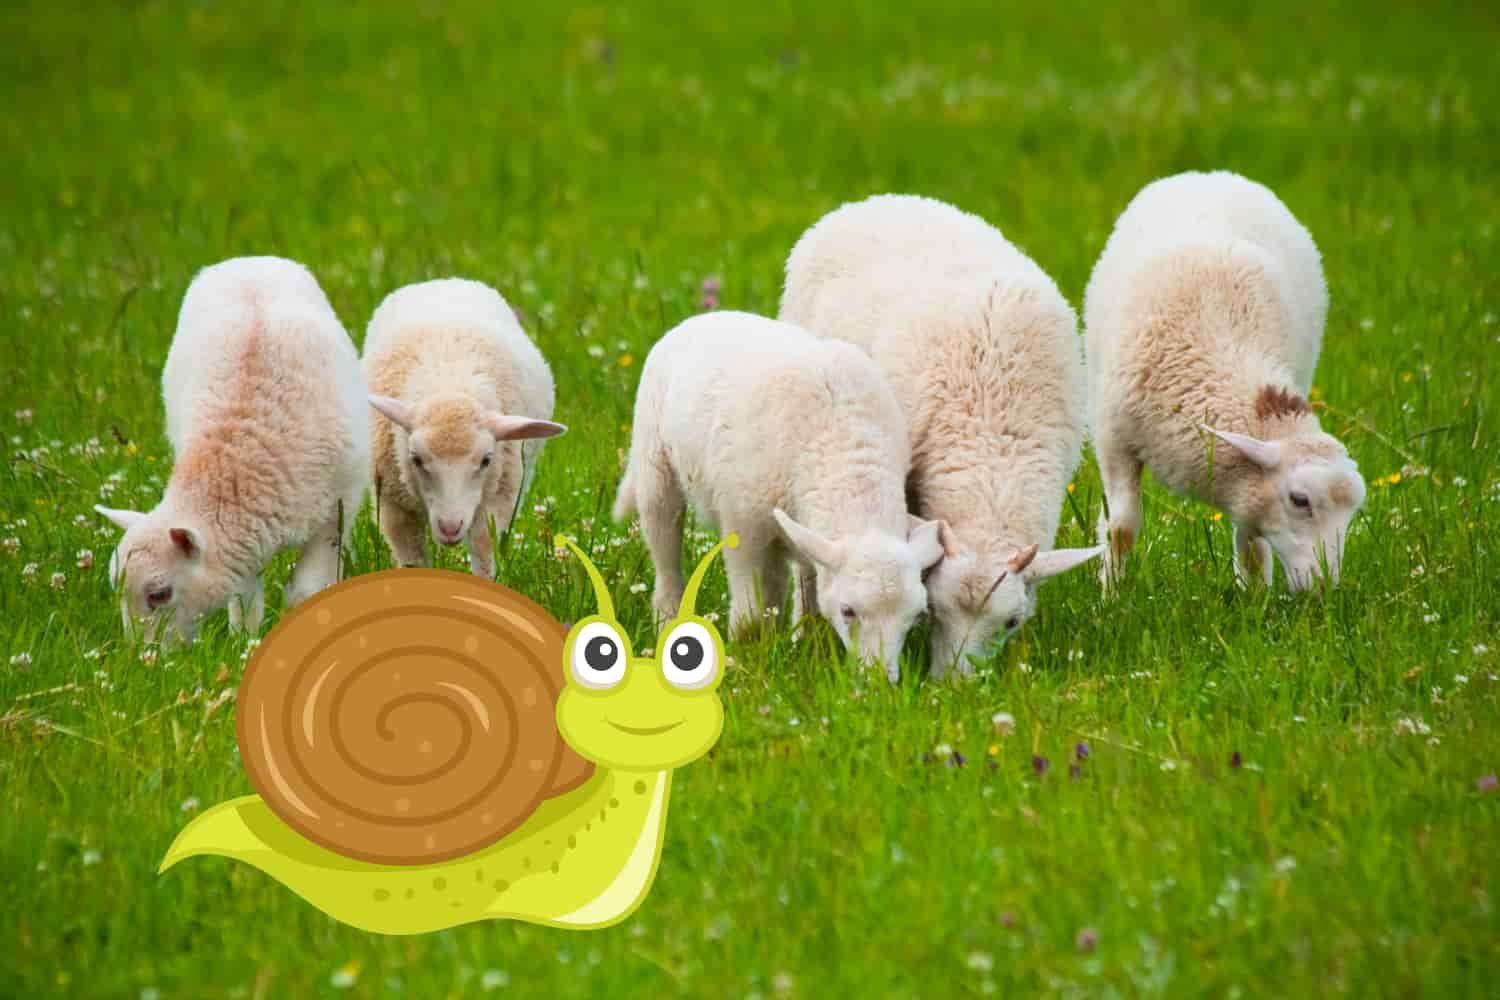 Object%20lesson%20-%20OT%20Psalm%2023%20-%20The%20Psalm%2023%20experience%20with%20snails-43e23d81 Sheep / shepherd